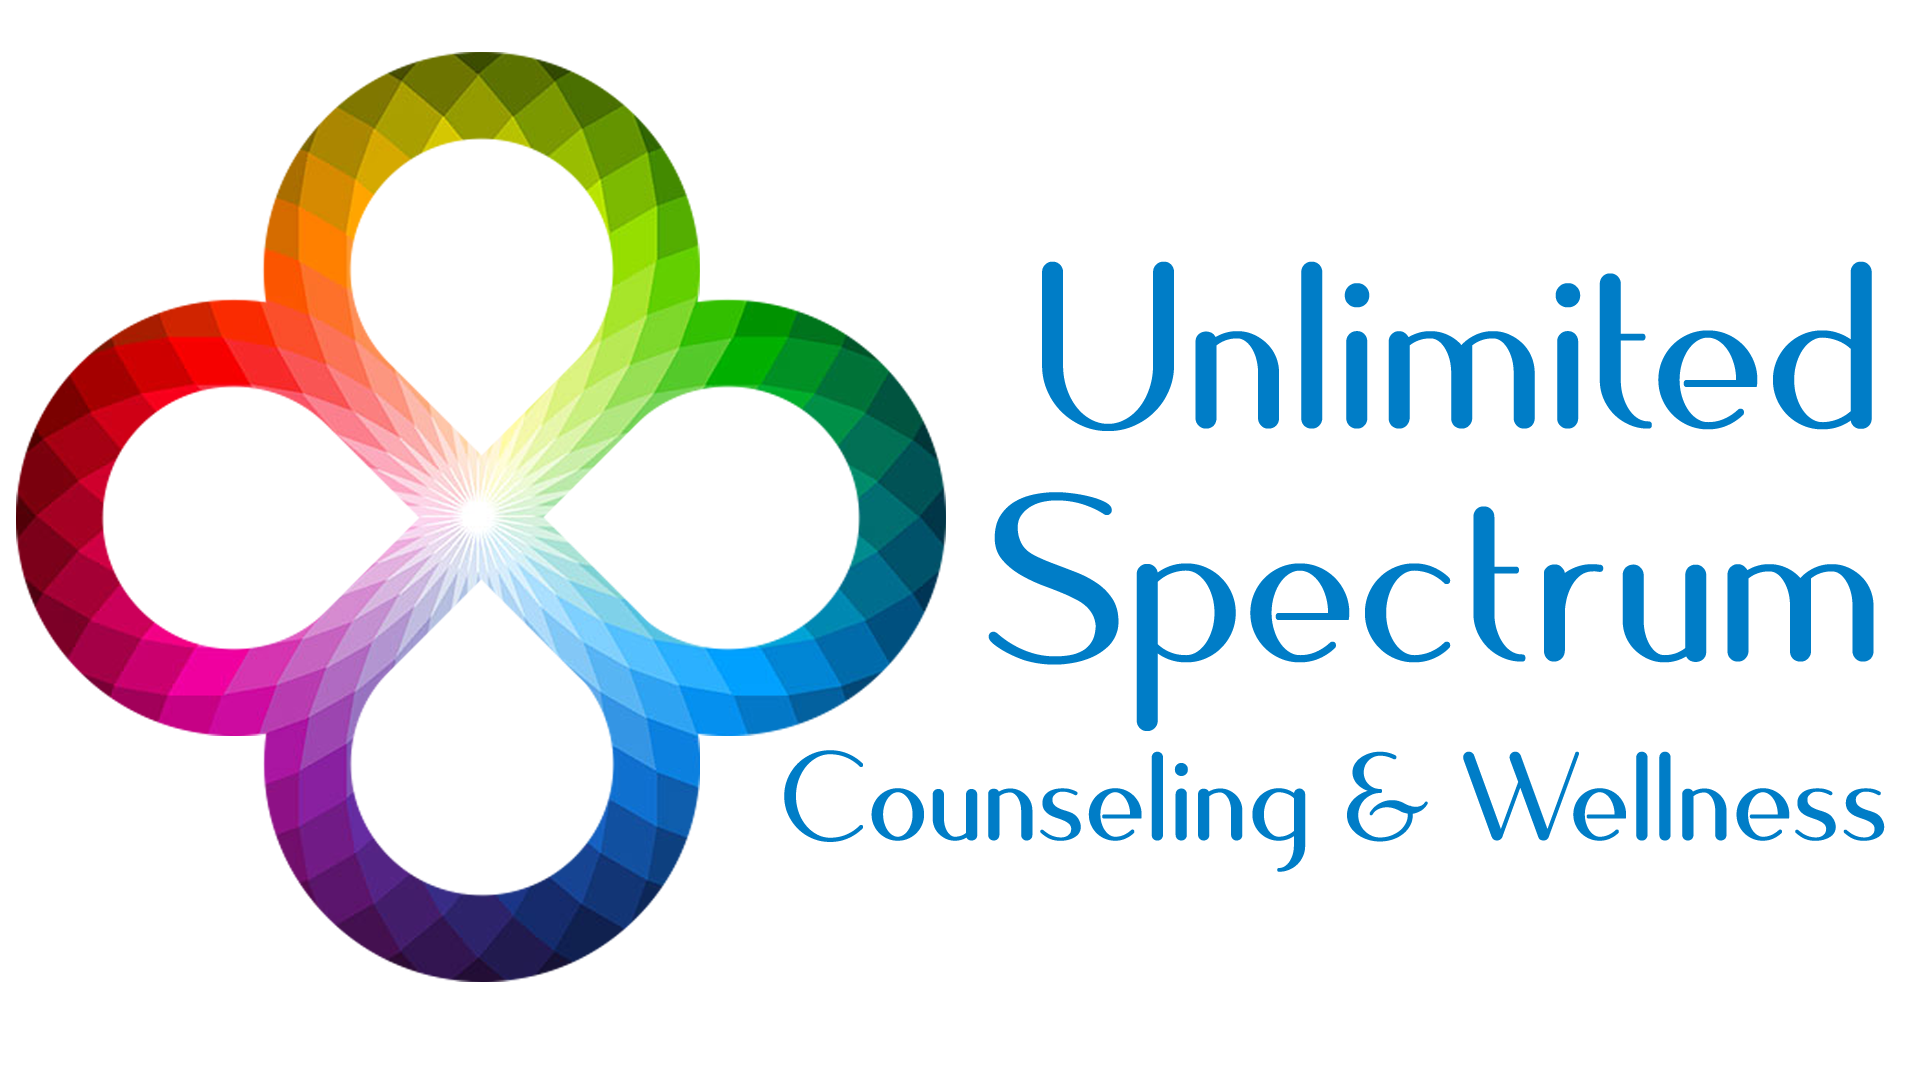 Unlimited Spectrum Counseling & Wellness